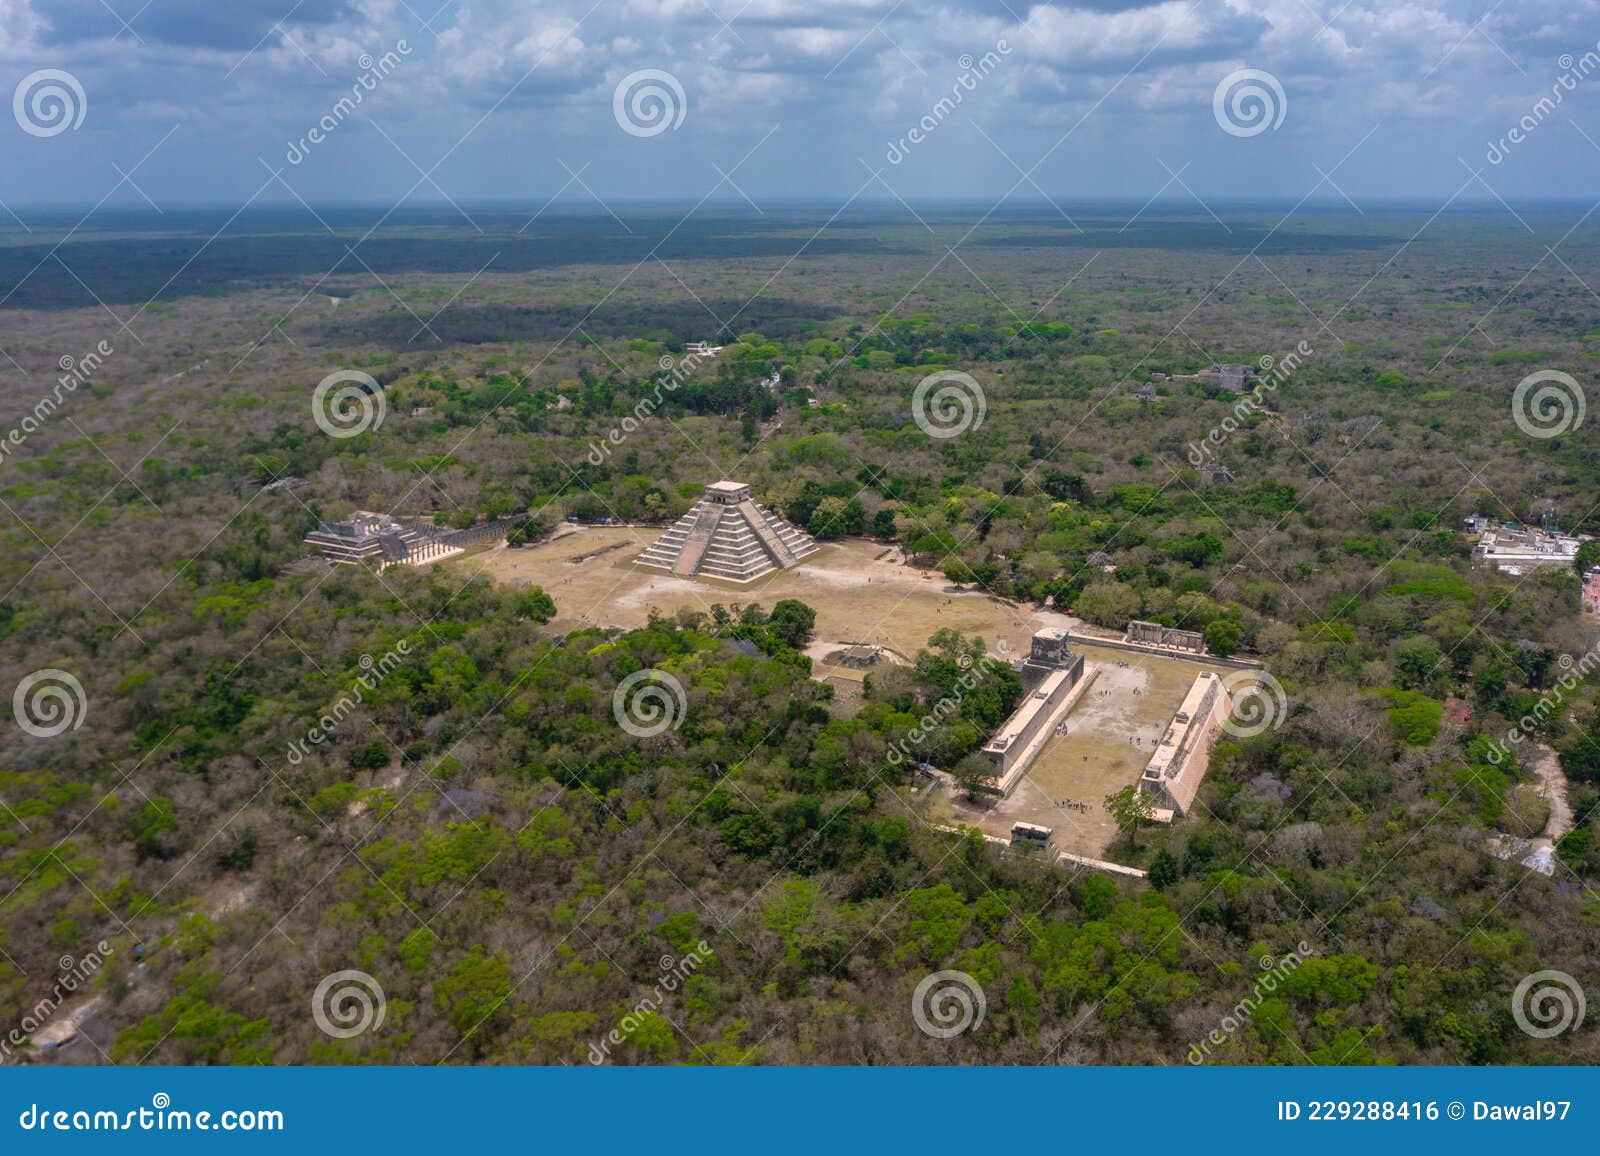 aerial view of the beautiful chicen itza and mayan pyramid in mexico surrounded with ground and greenery with ocean